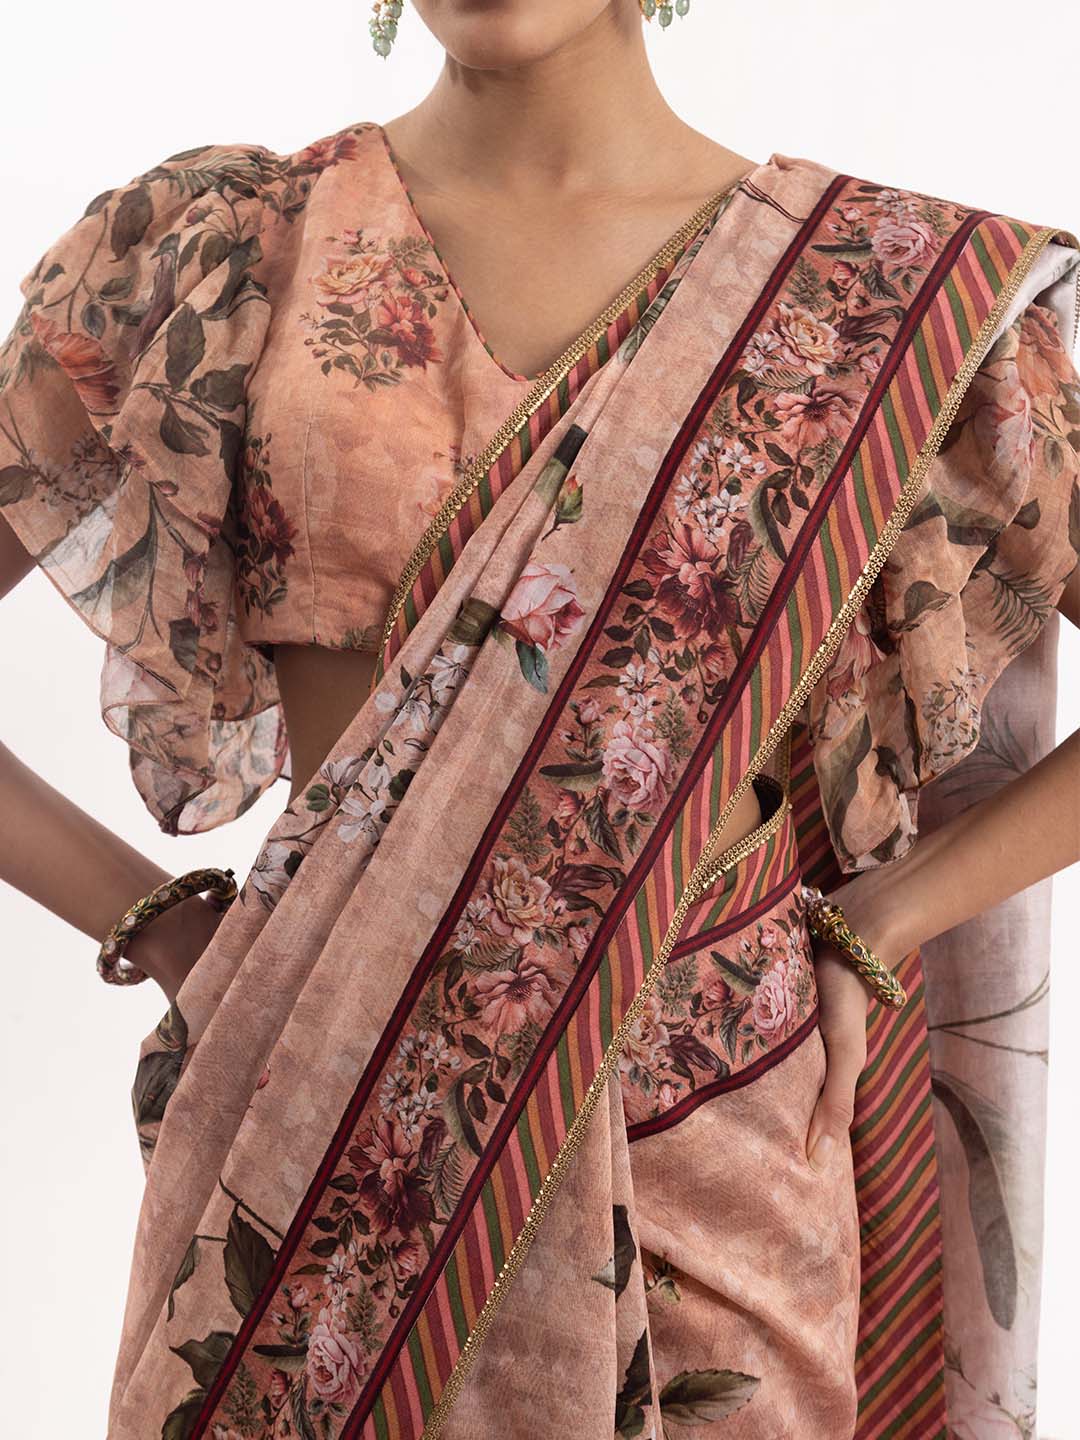 Graceful cotton silk saree adorned with intricate detailing.